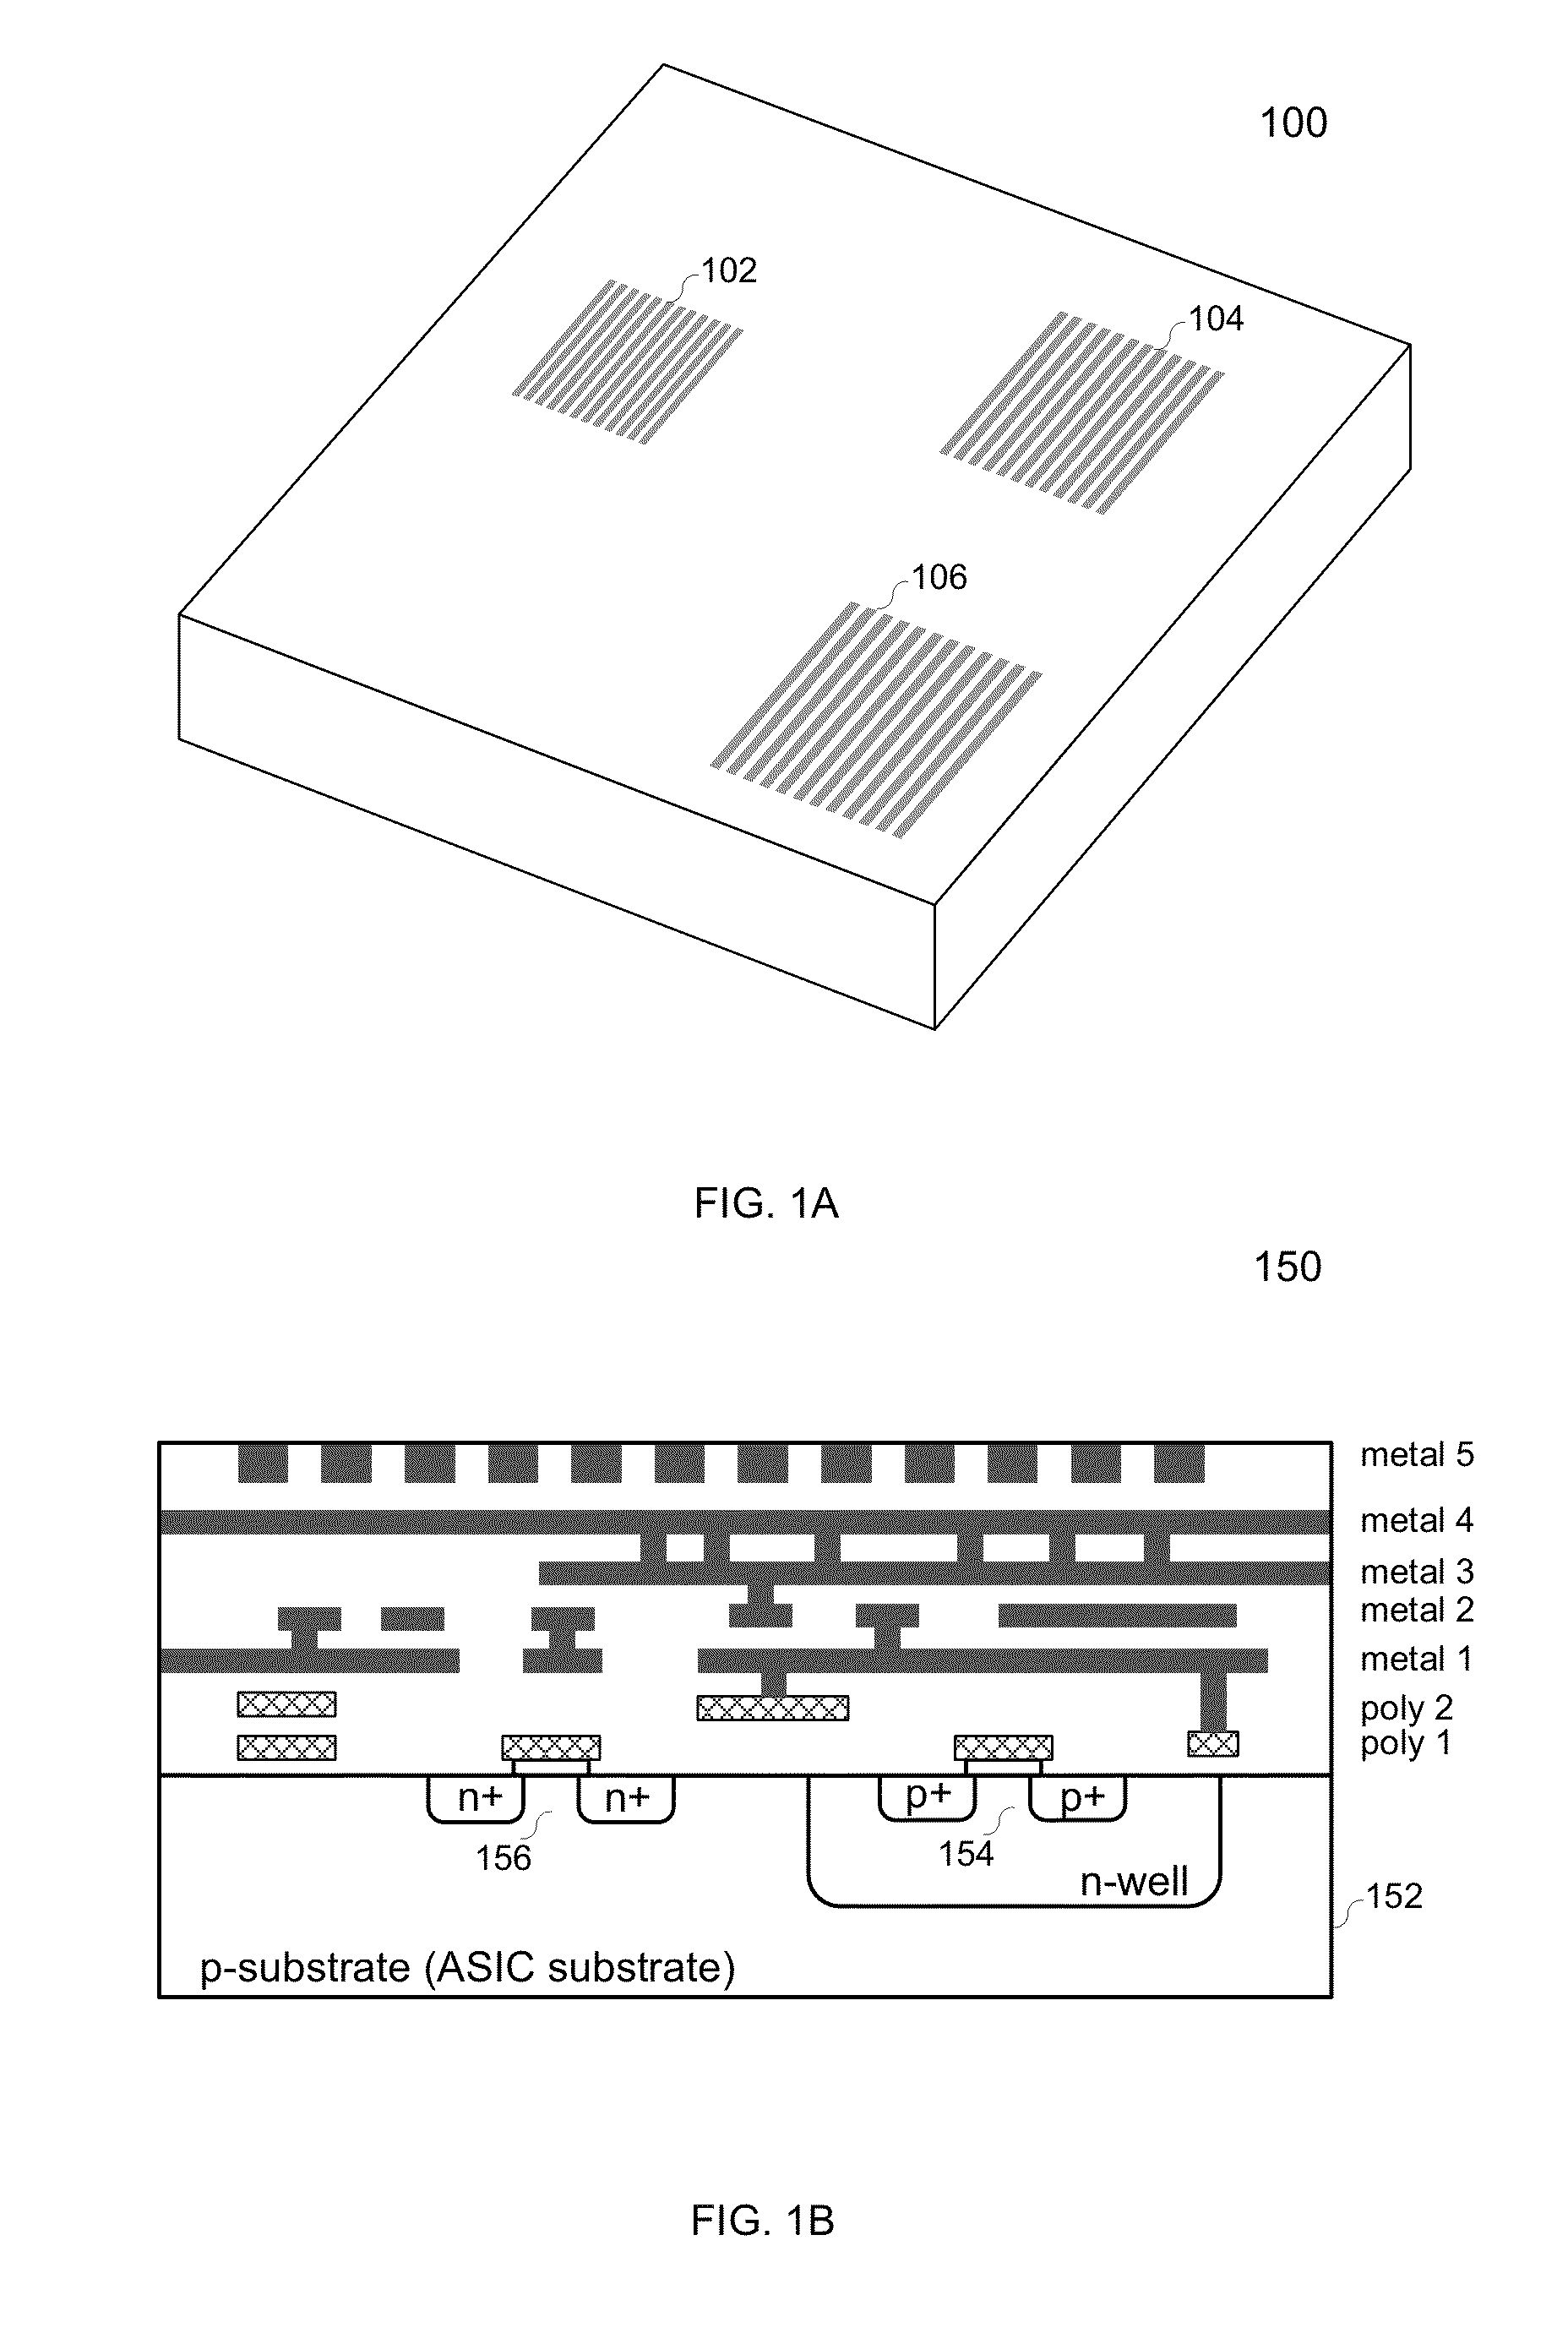 Tamper detection countermeasures to deter physical attack on a security asic